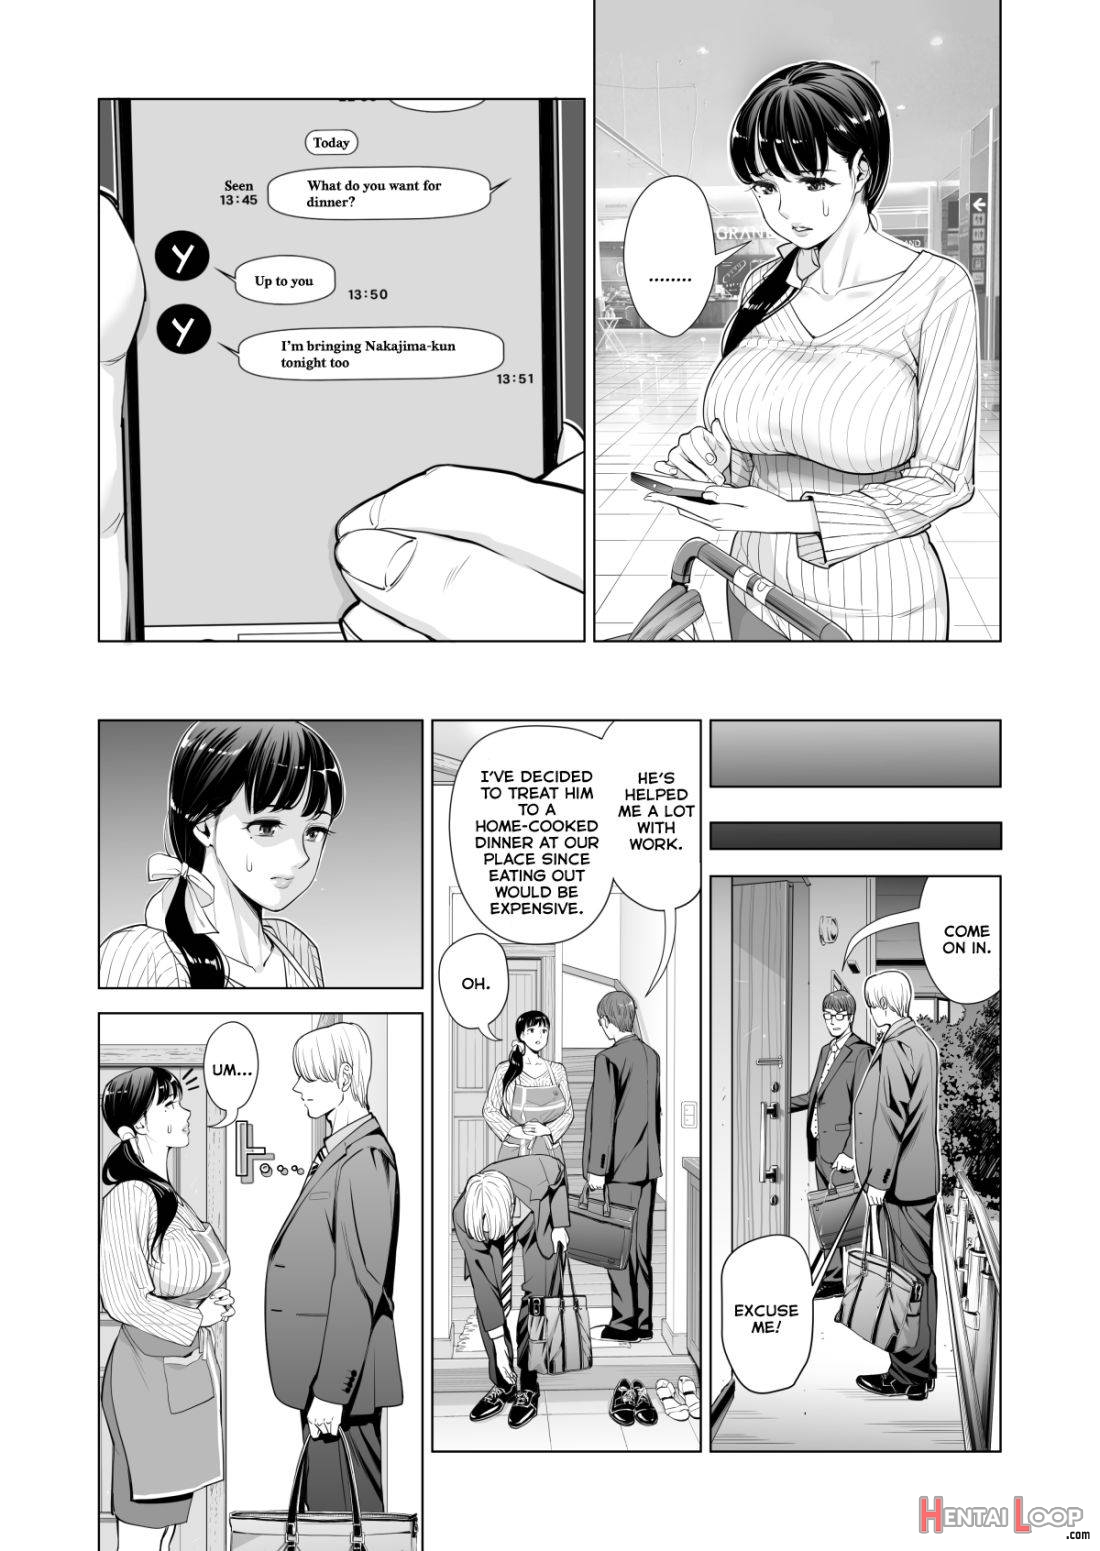 Tsukiyo no Midare Zake (Zenpen) Moonlit Intoxication ~ A Housewife Stolen by a Coworker Besides her Blackout Drunk Husband ~ Chapter 1 page 20